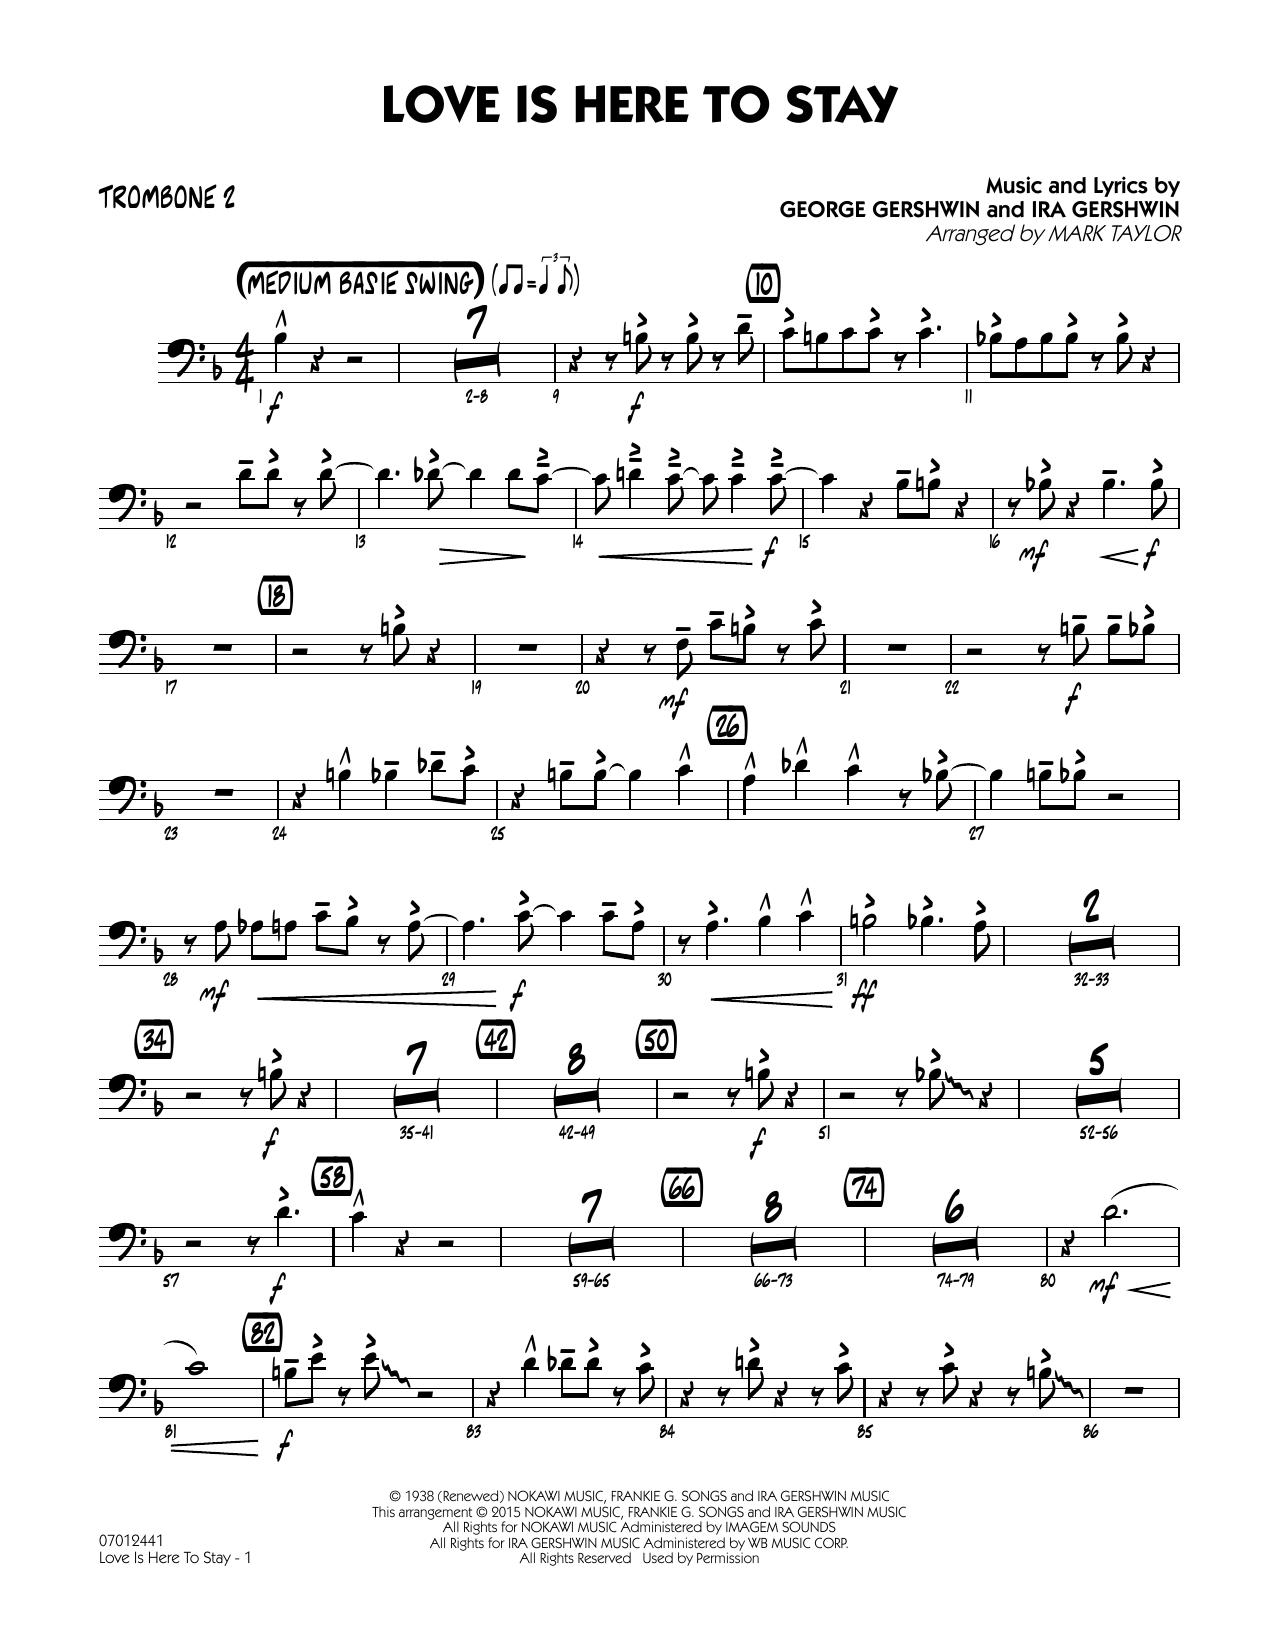 Mark Taylor Love Is Here to Stay - Trombone 2 sheet music notes and chords. Download Printable PDF.